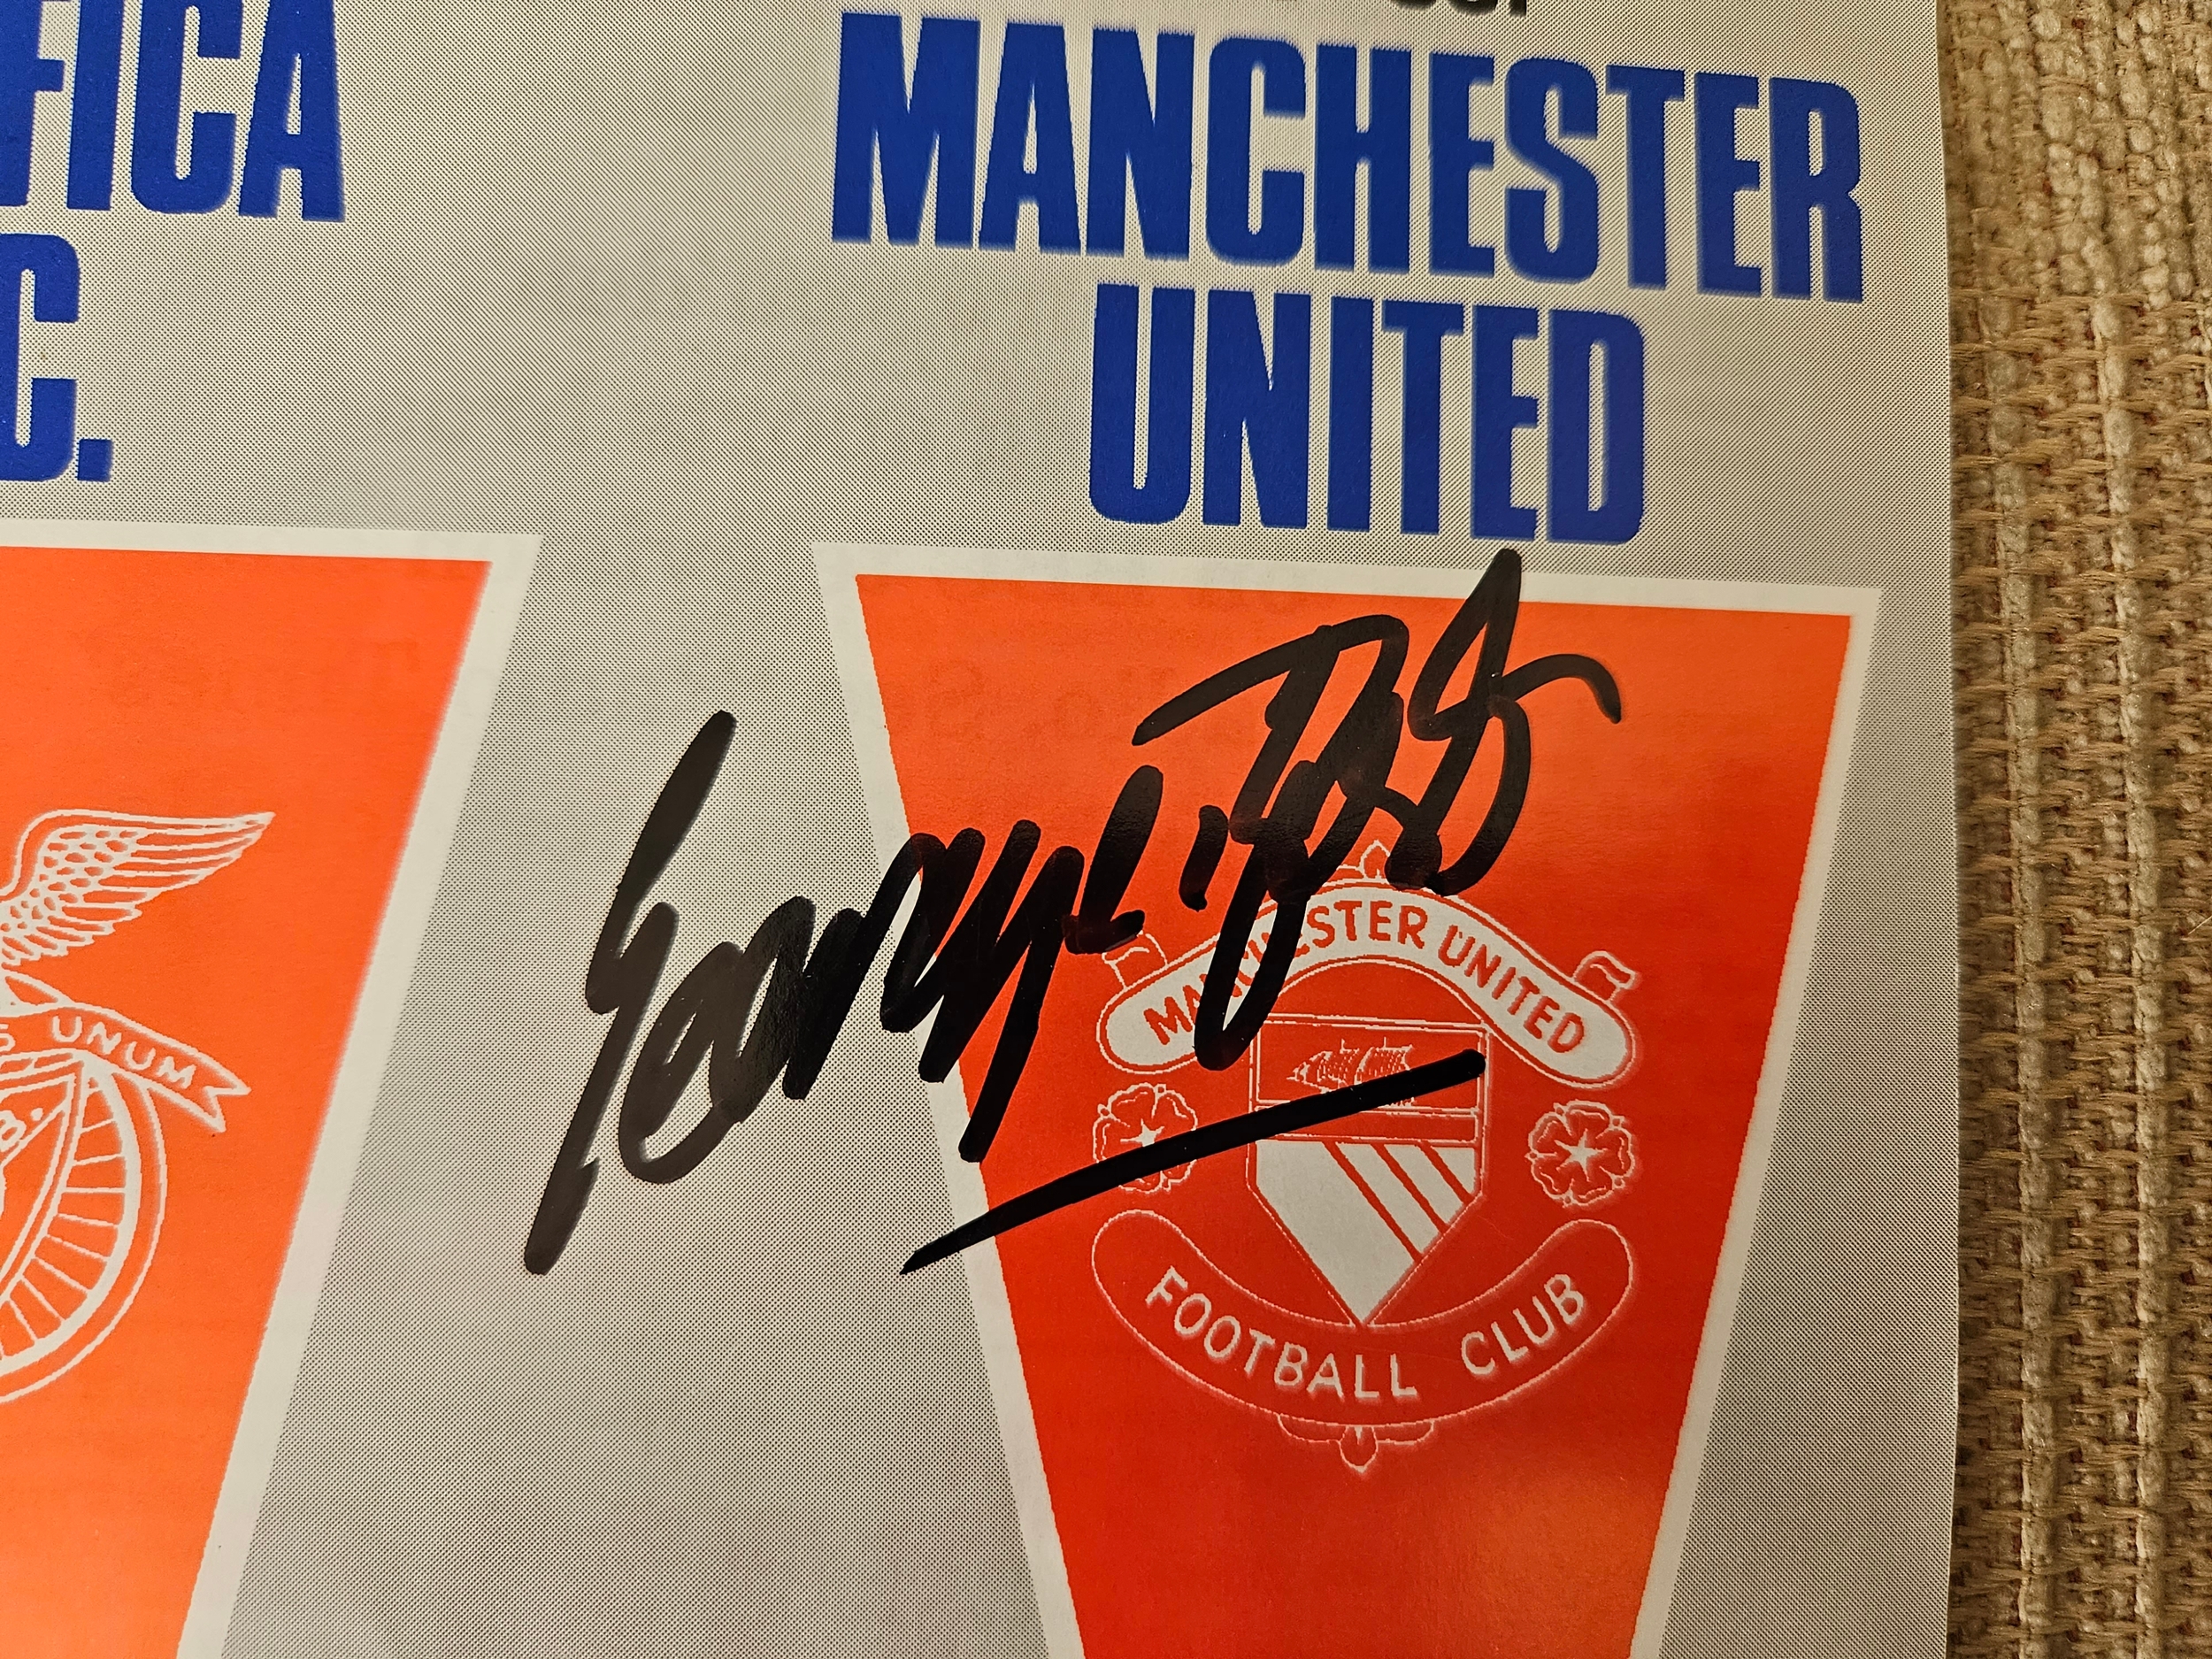 GEORGE BEST 1967 MATCH WORN MANCHESTER UNITED JERSEY AND A 1968 EUROPEAN CUP FINAL SIGNED - Image 9 of 14